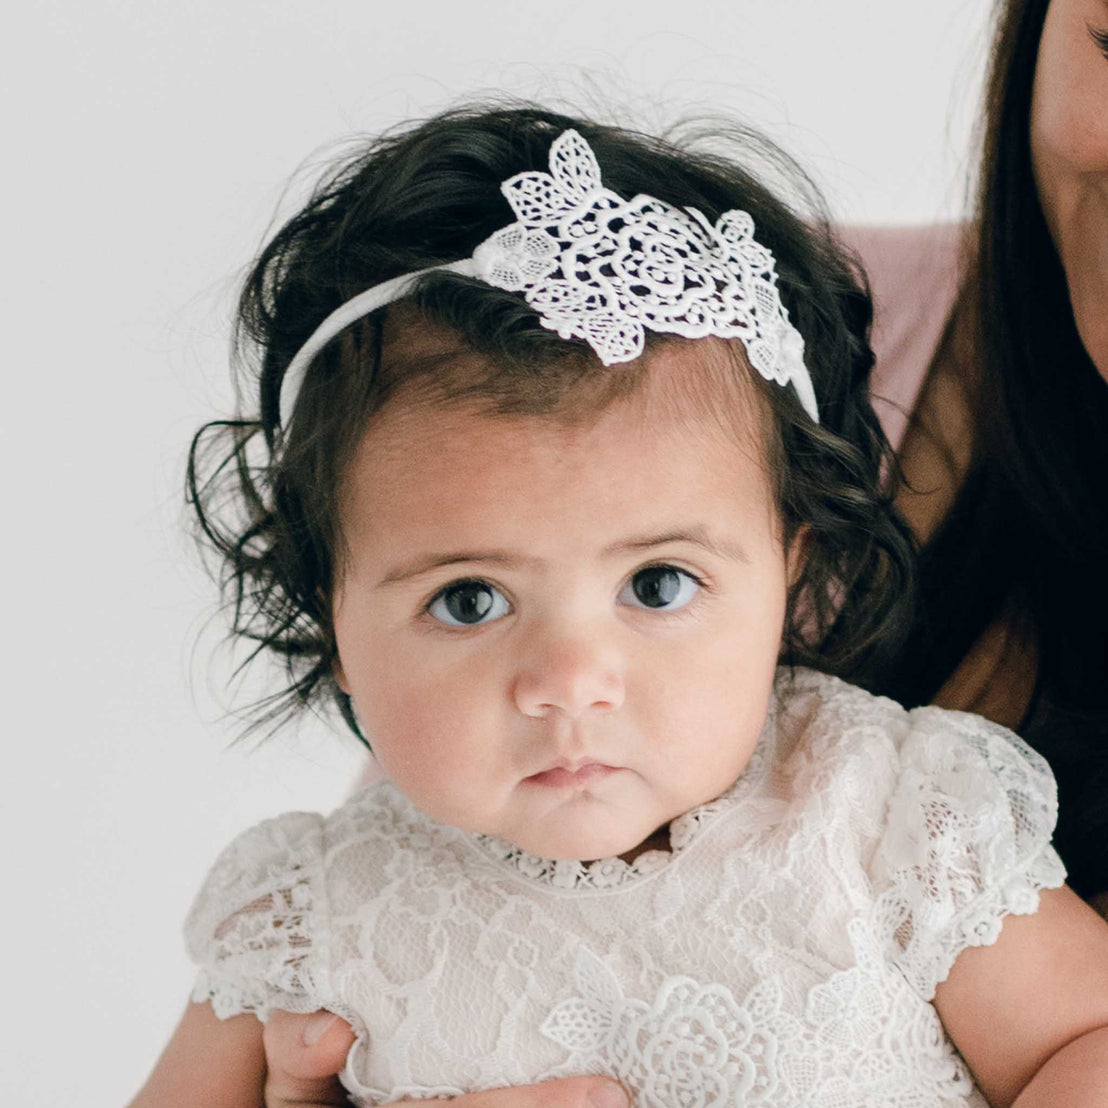 A baby with dark eyes and wavy hair wearing a white vintage lace dress and a white headband with a lace bow.